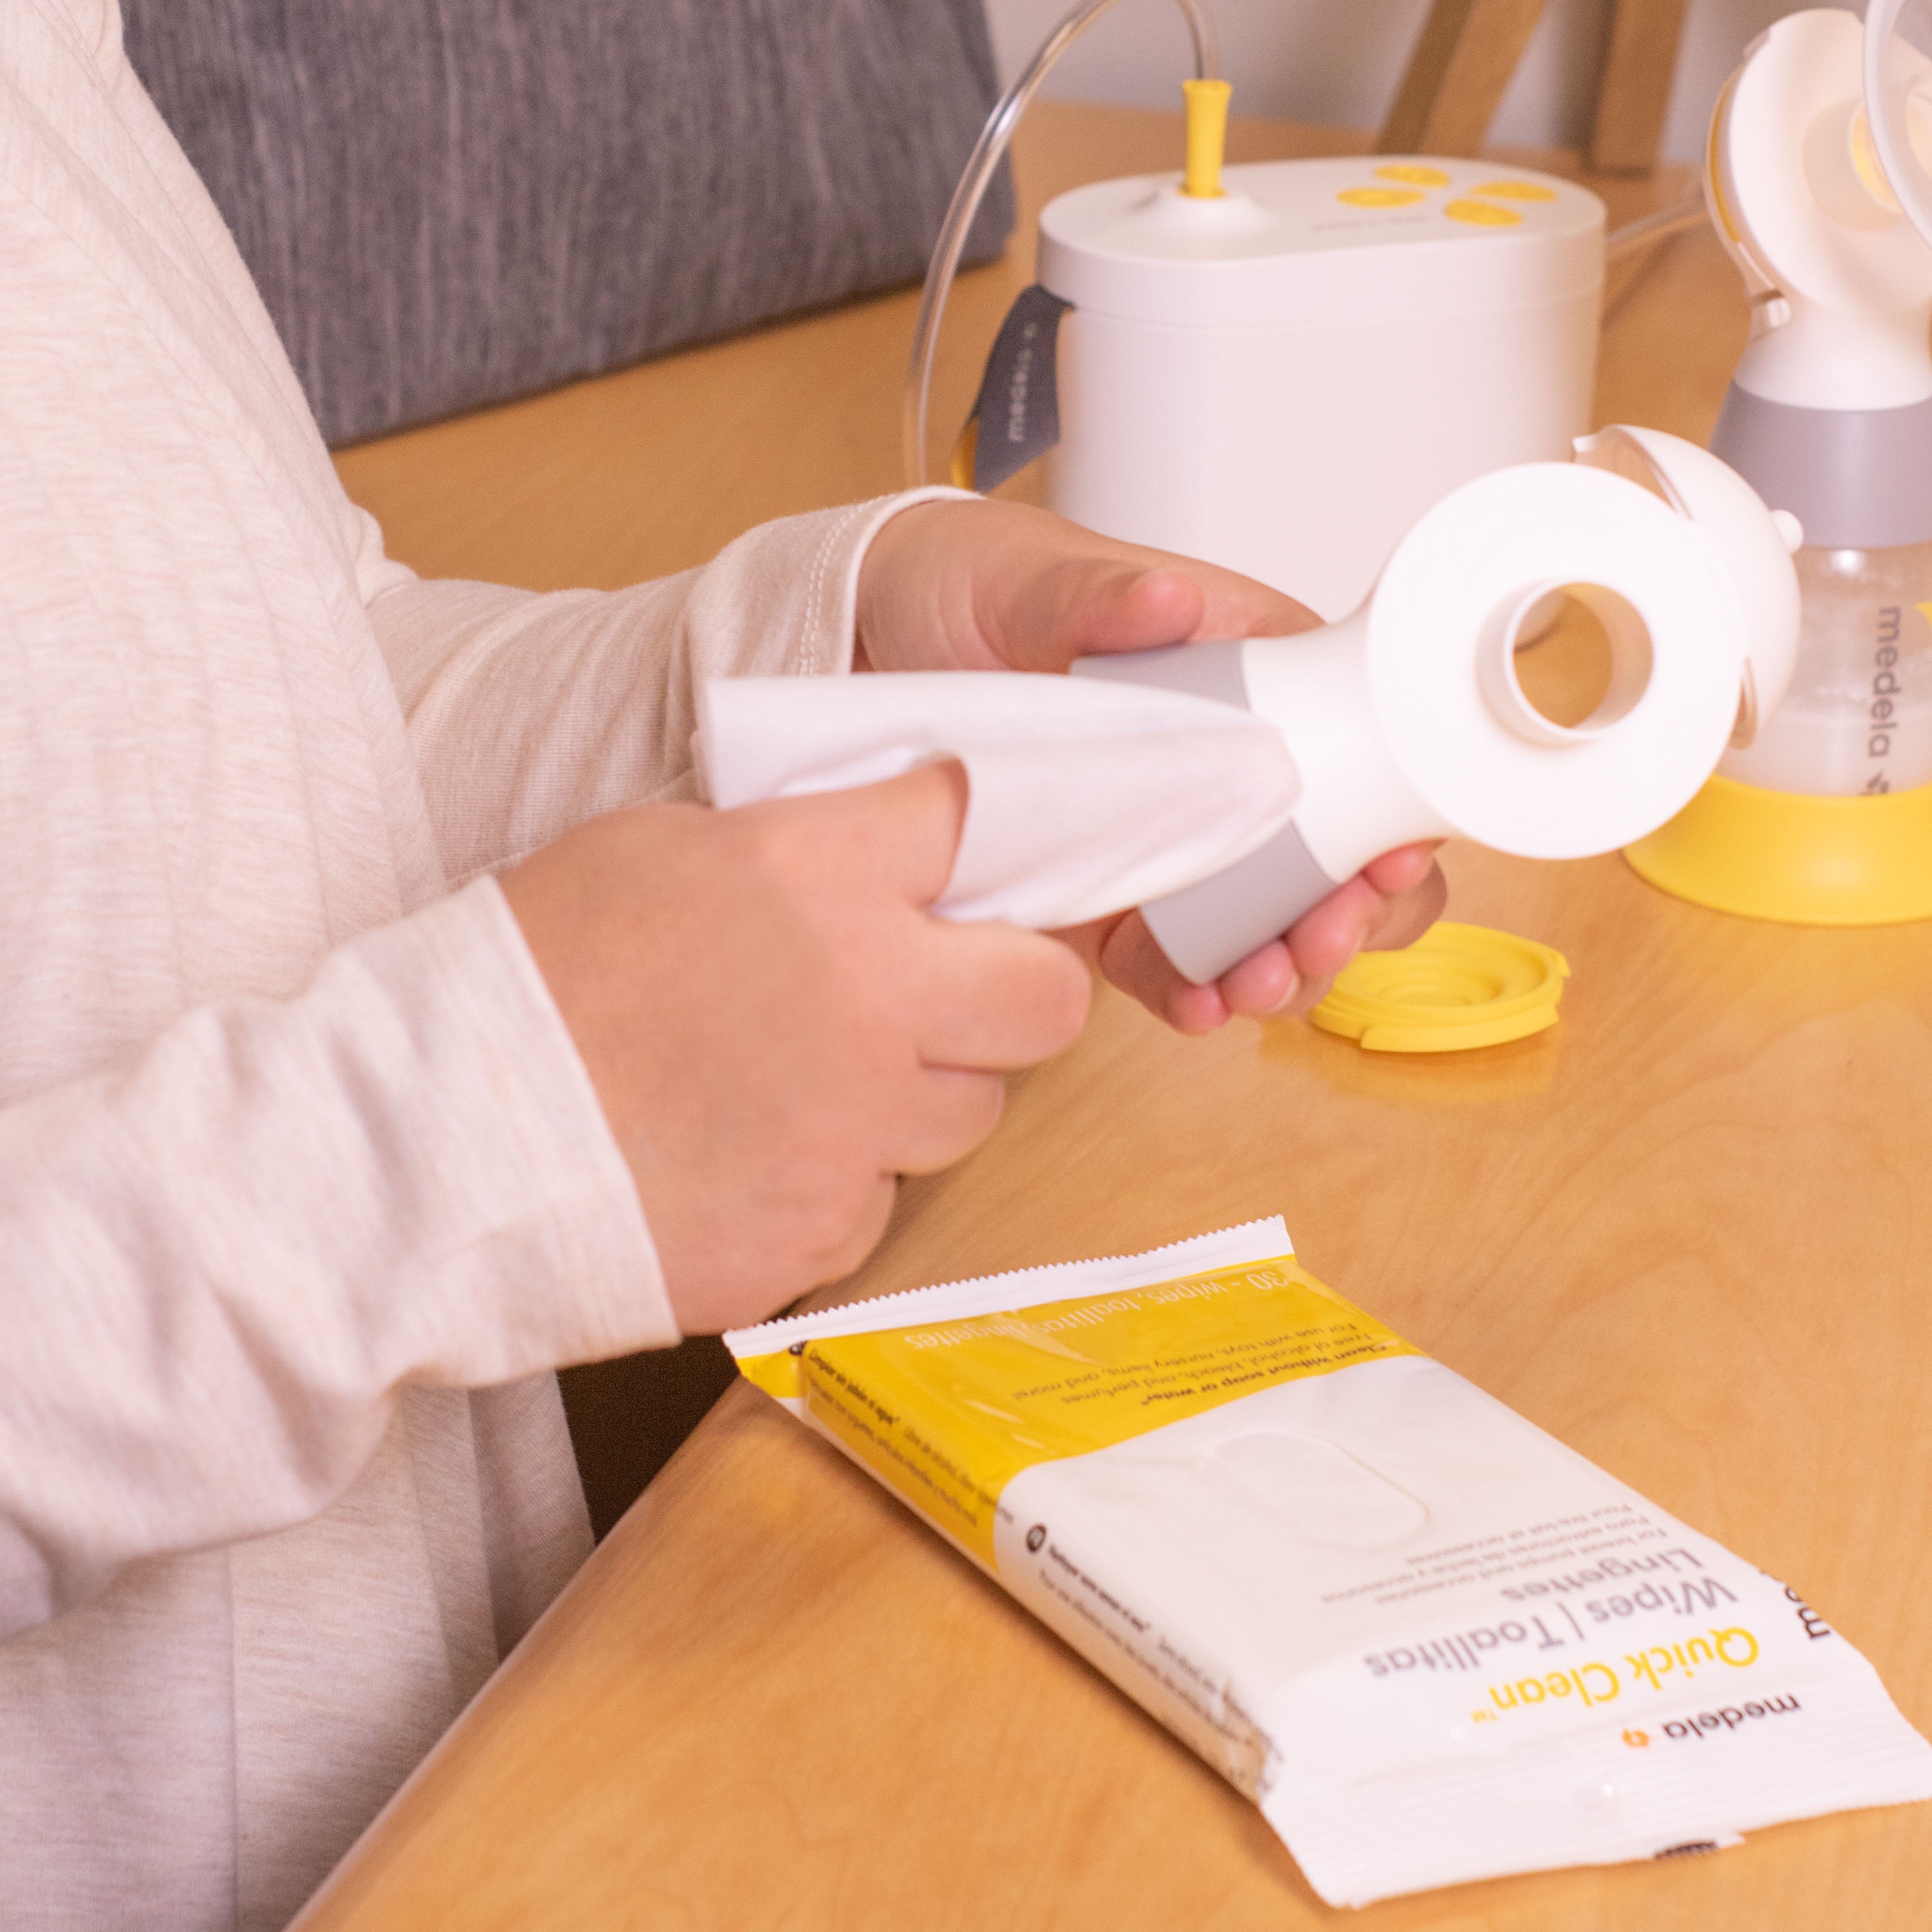 Medela Quick Clean 87055 Breast Pump and Accessory Wipes 24 Count for sale  online